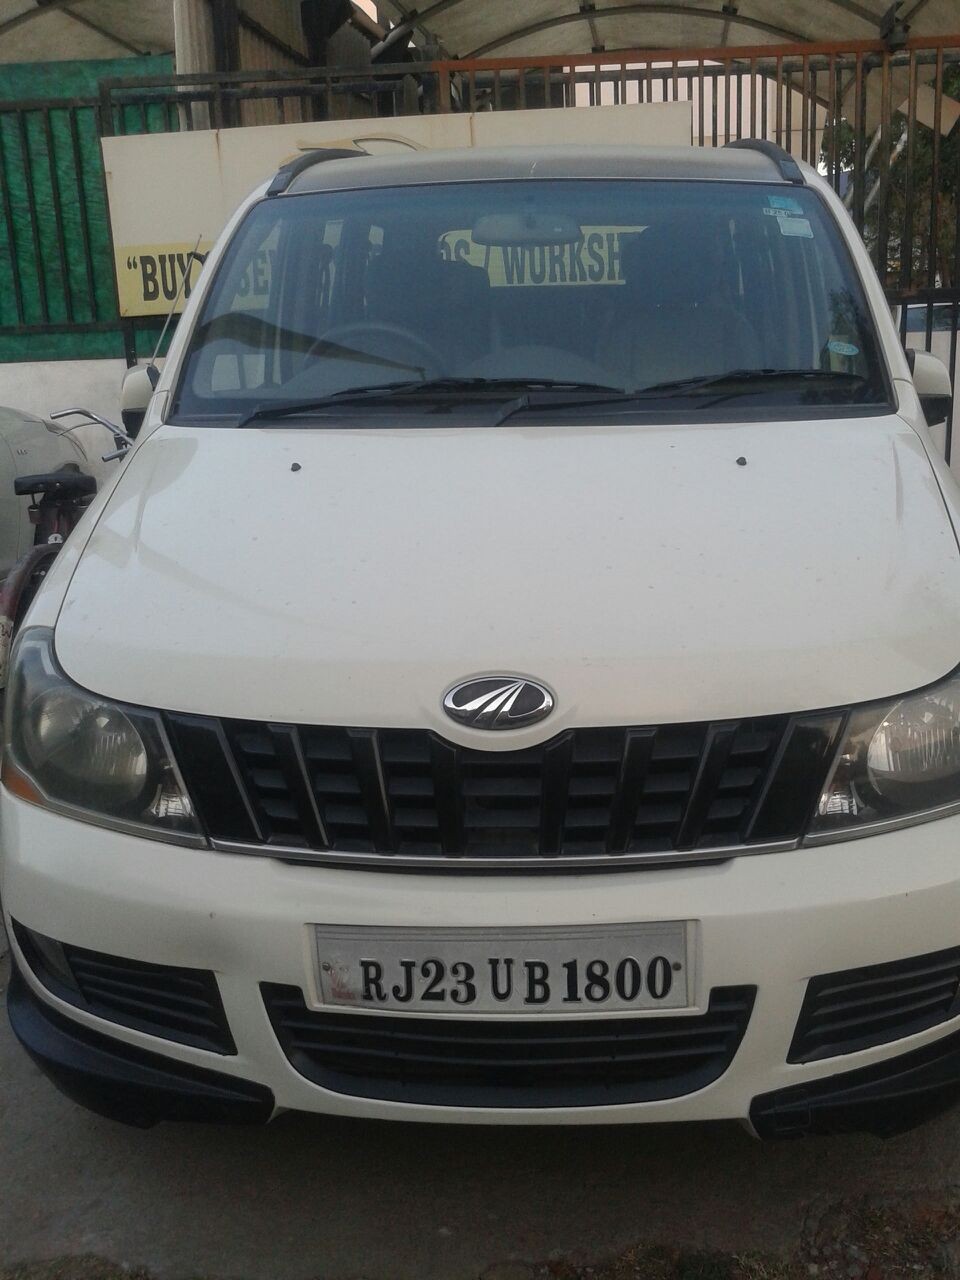 Mahindra Xylo Car For Sale In Jaipur Id 1415238384 Droom